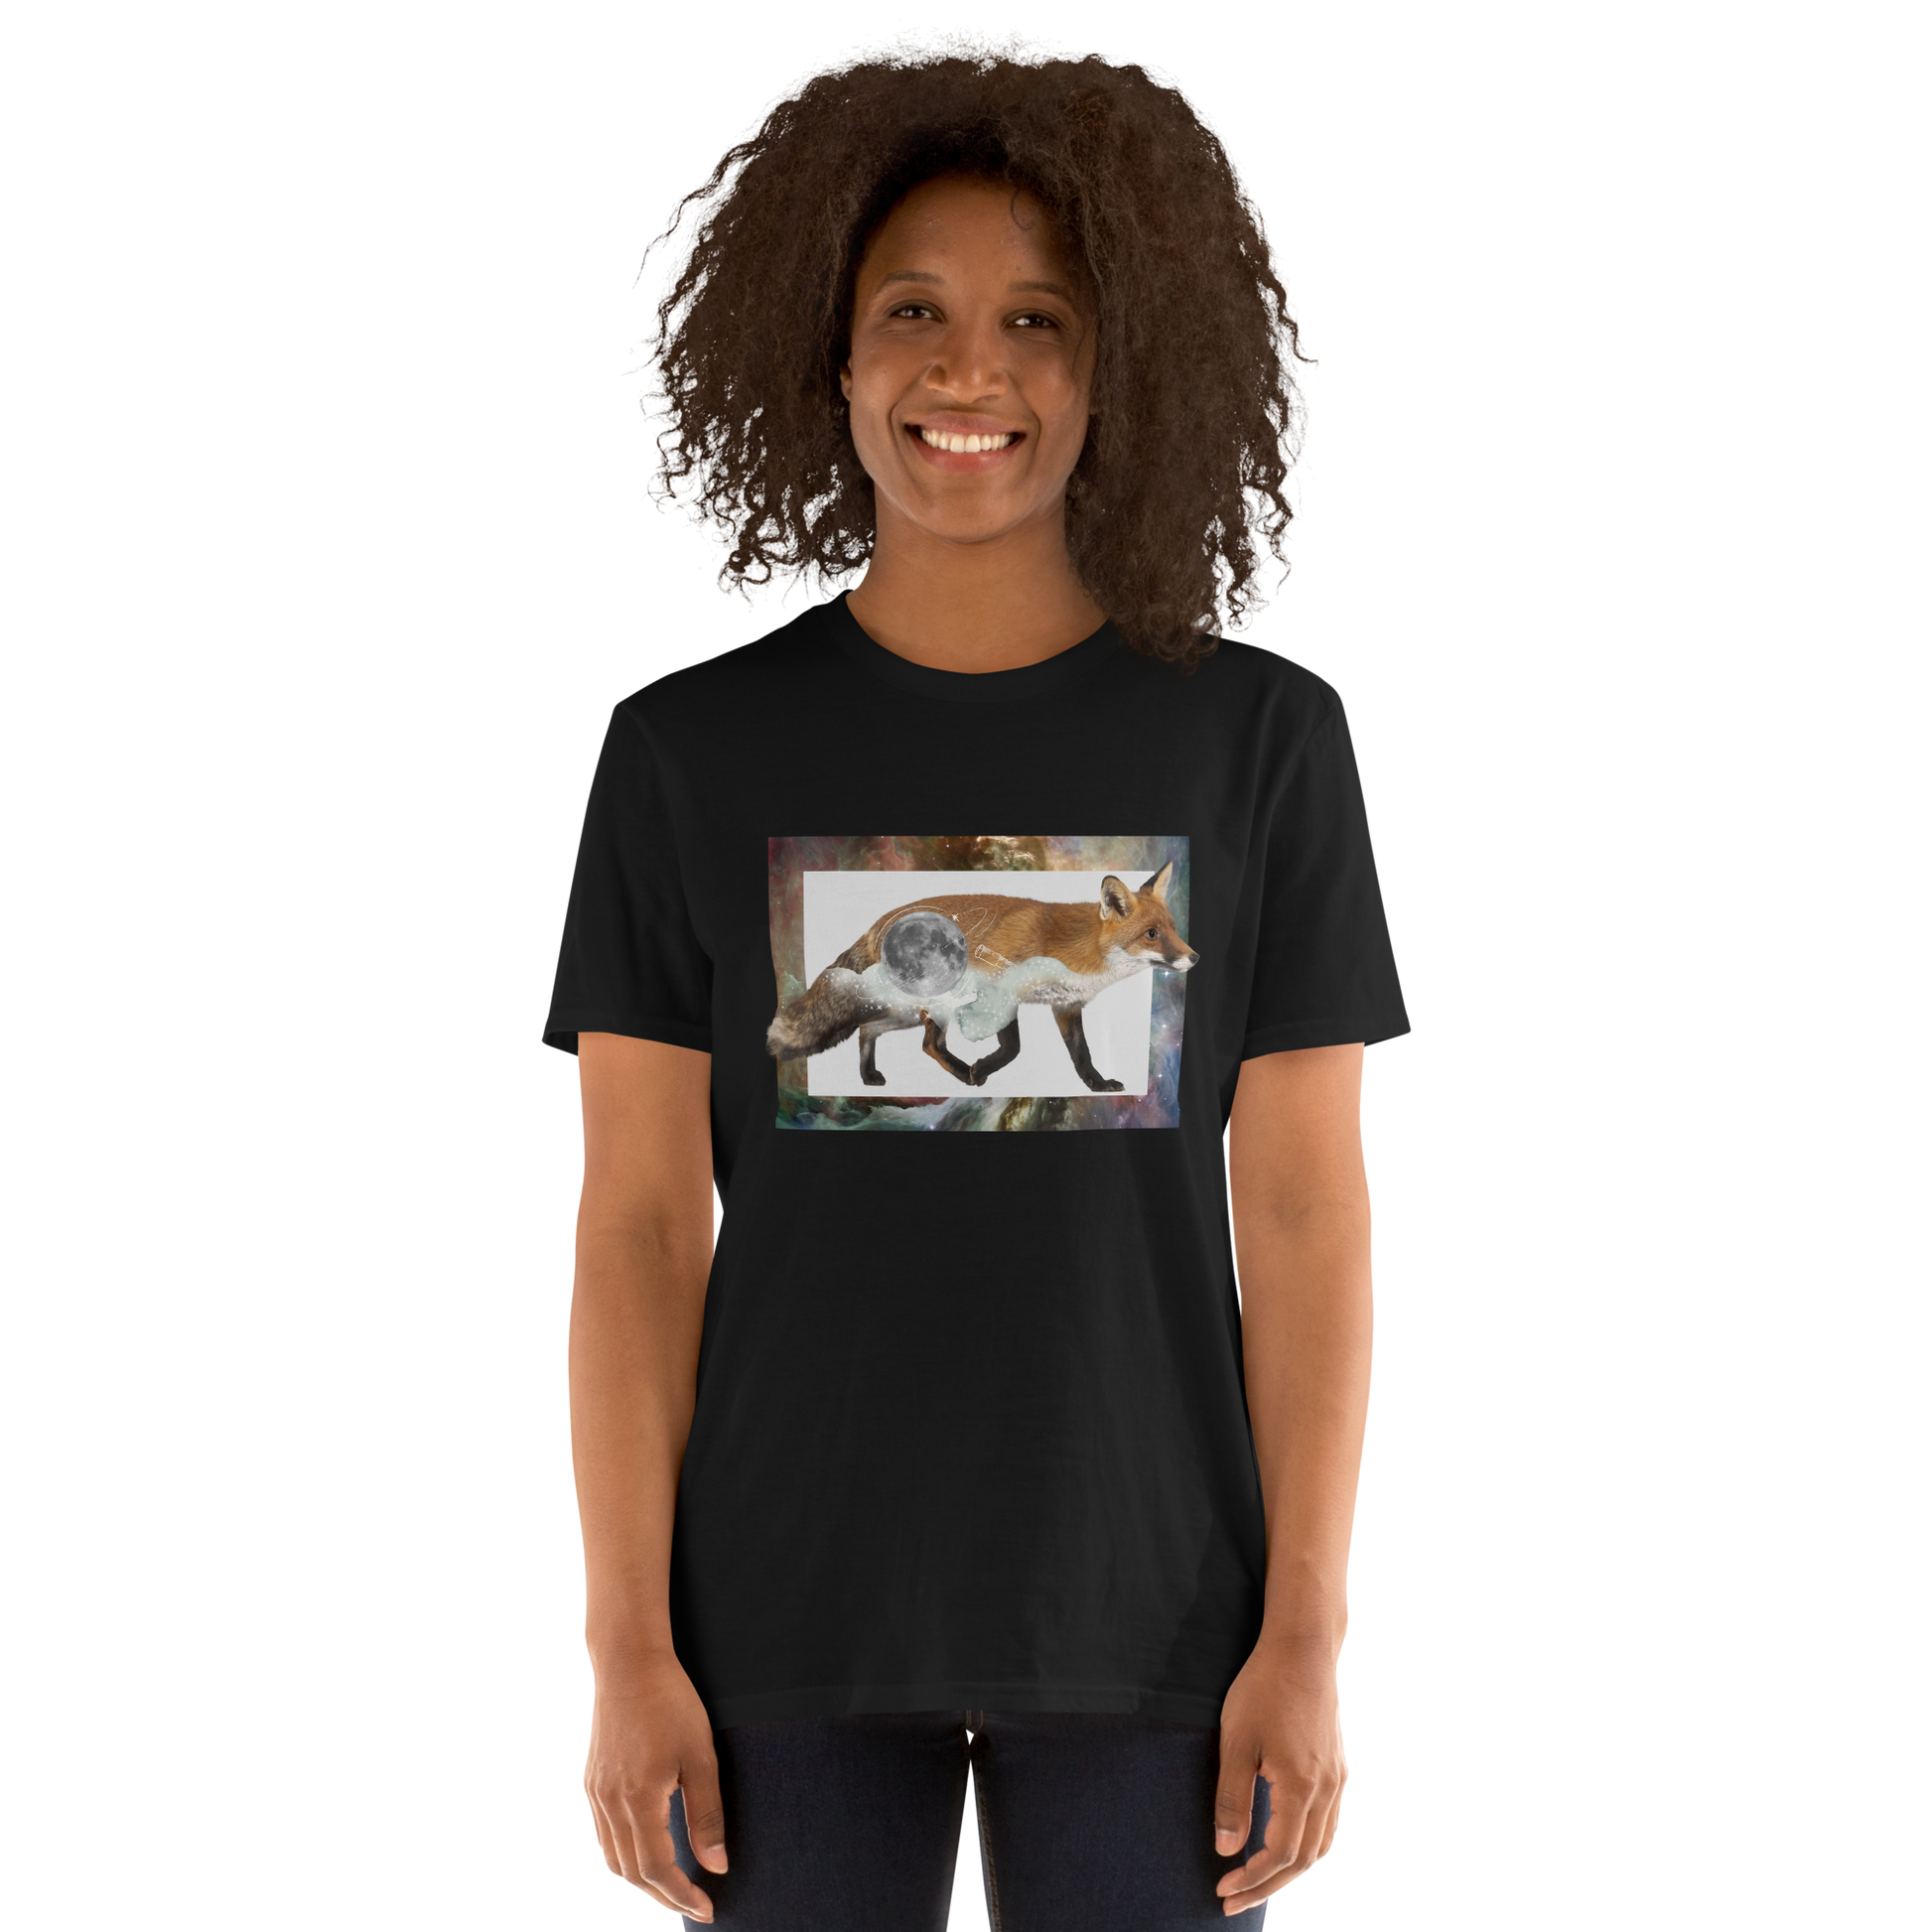 Smiling woman wearing a Black Fox T-Shirt featuring a captivating Space Fox graphic on the chest - Cool Graphic Fox T-Shirts - Boozy Fox